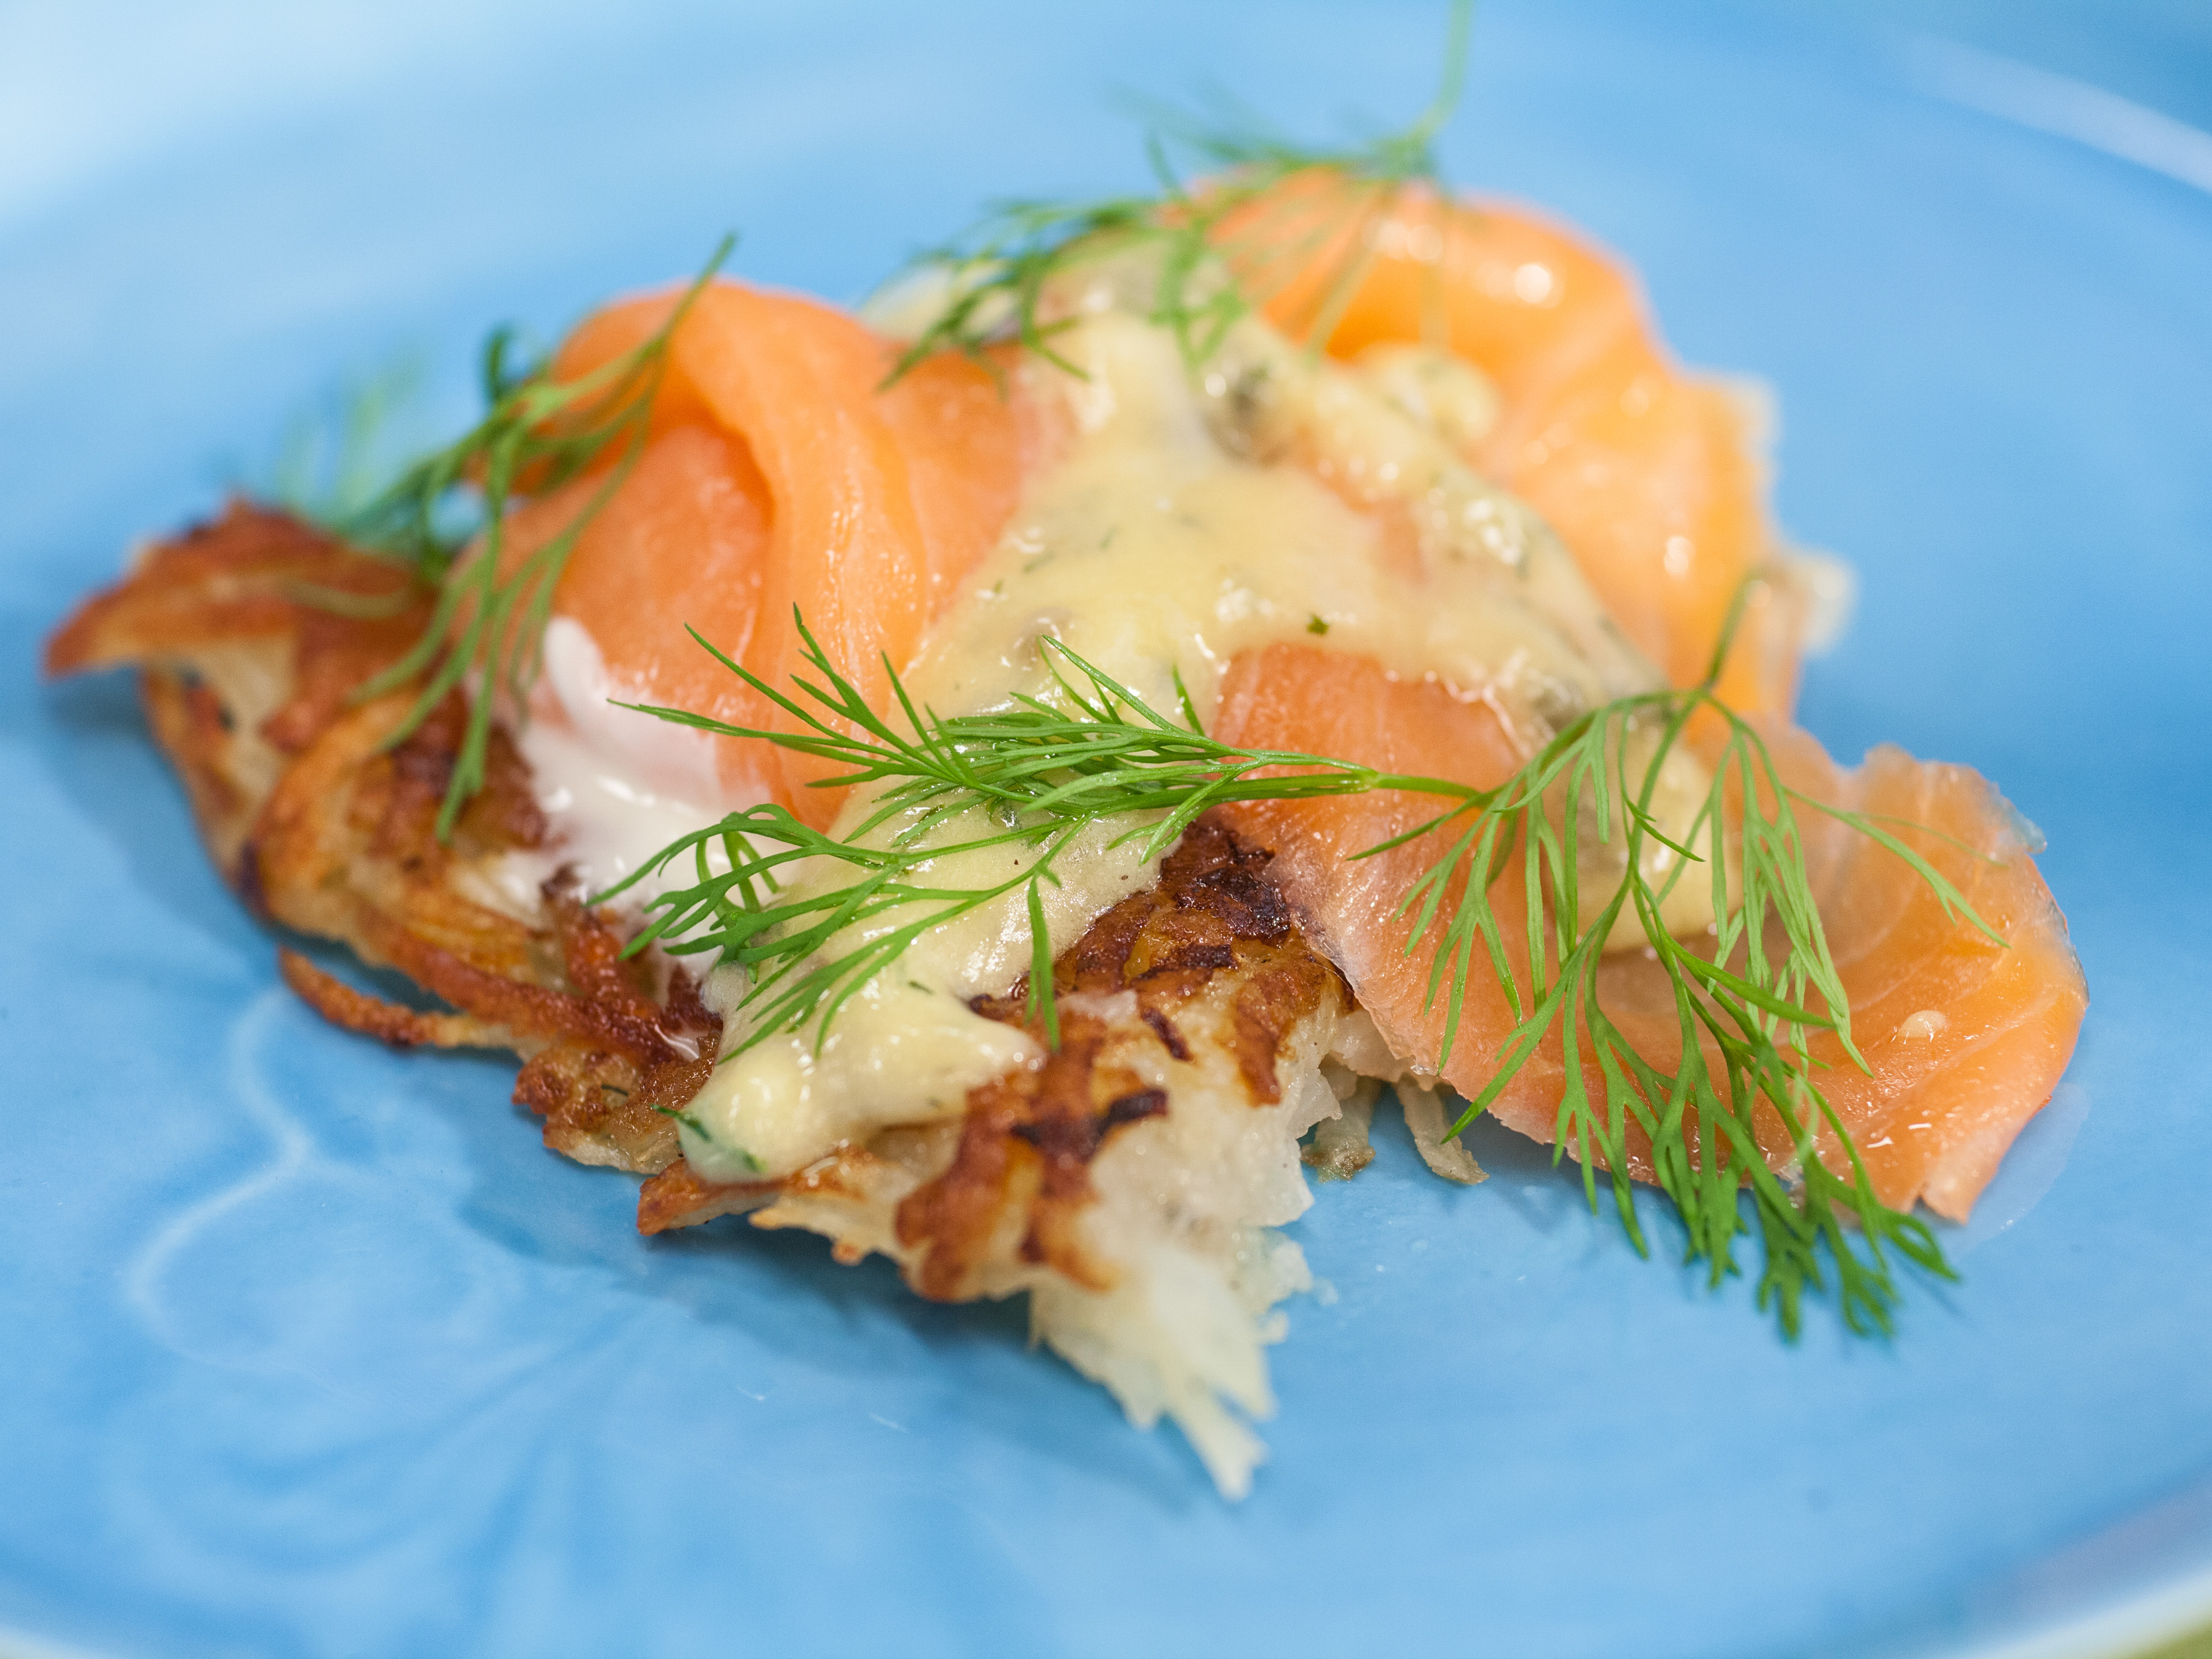 Smoked Salmon Bites with Shallot Sauce Recipe: How to Make It